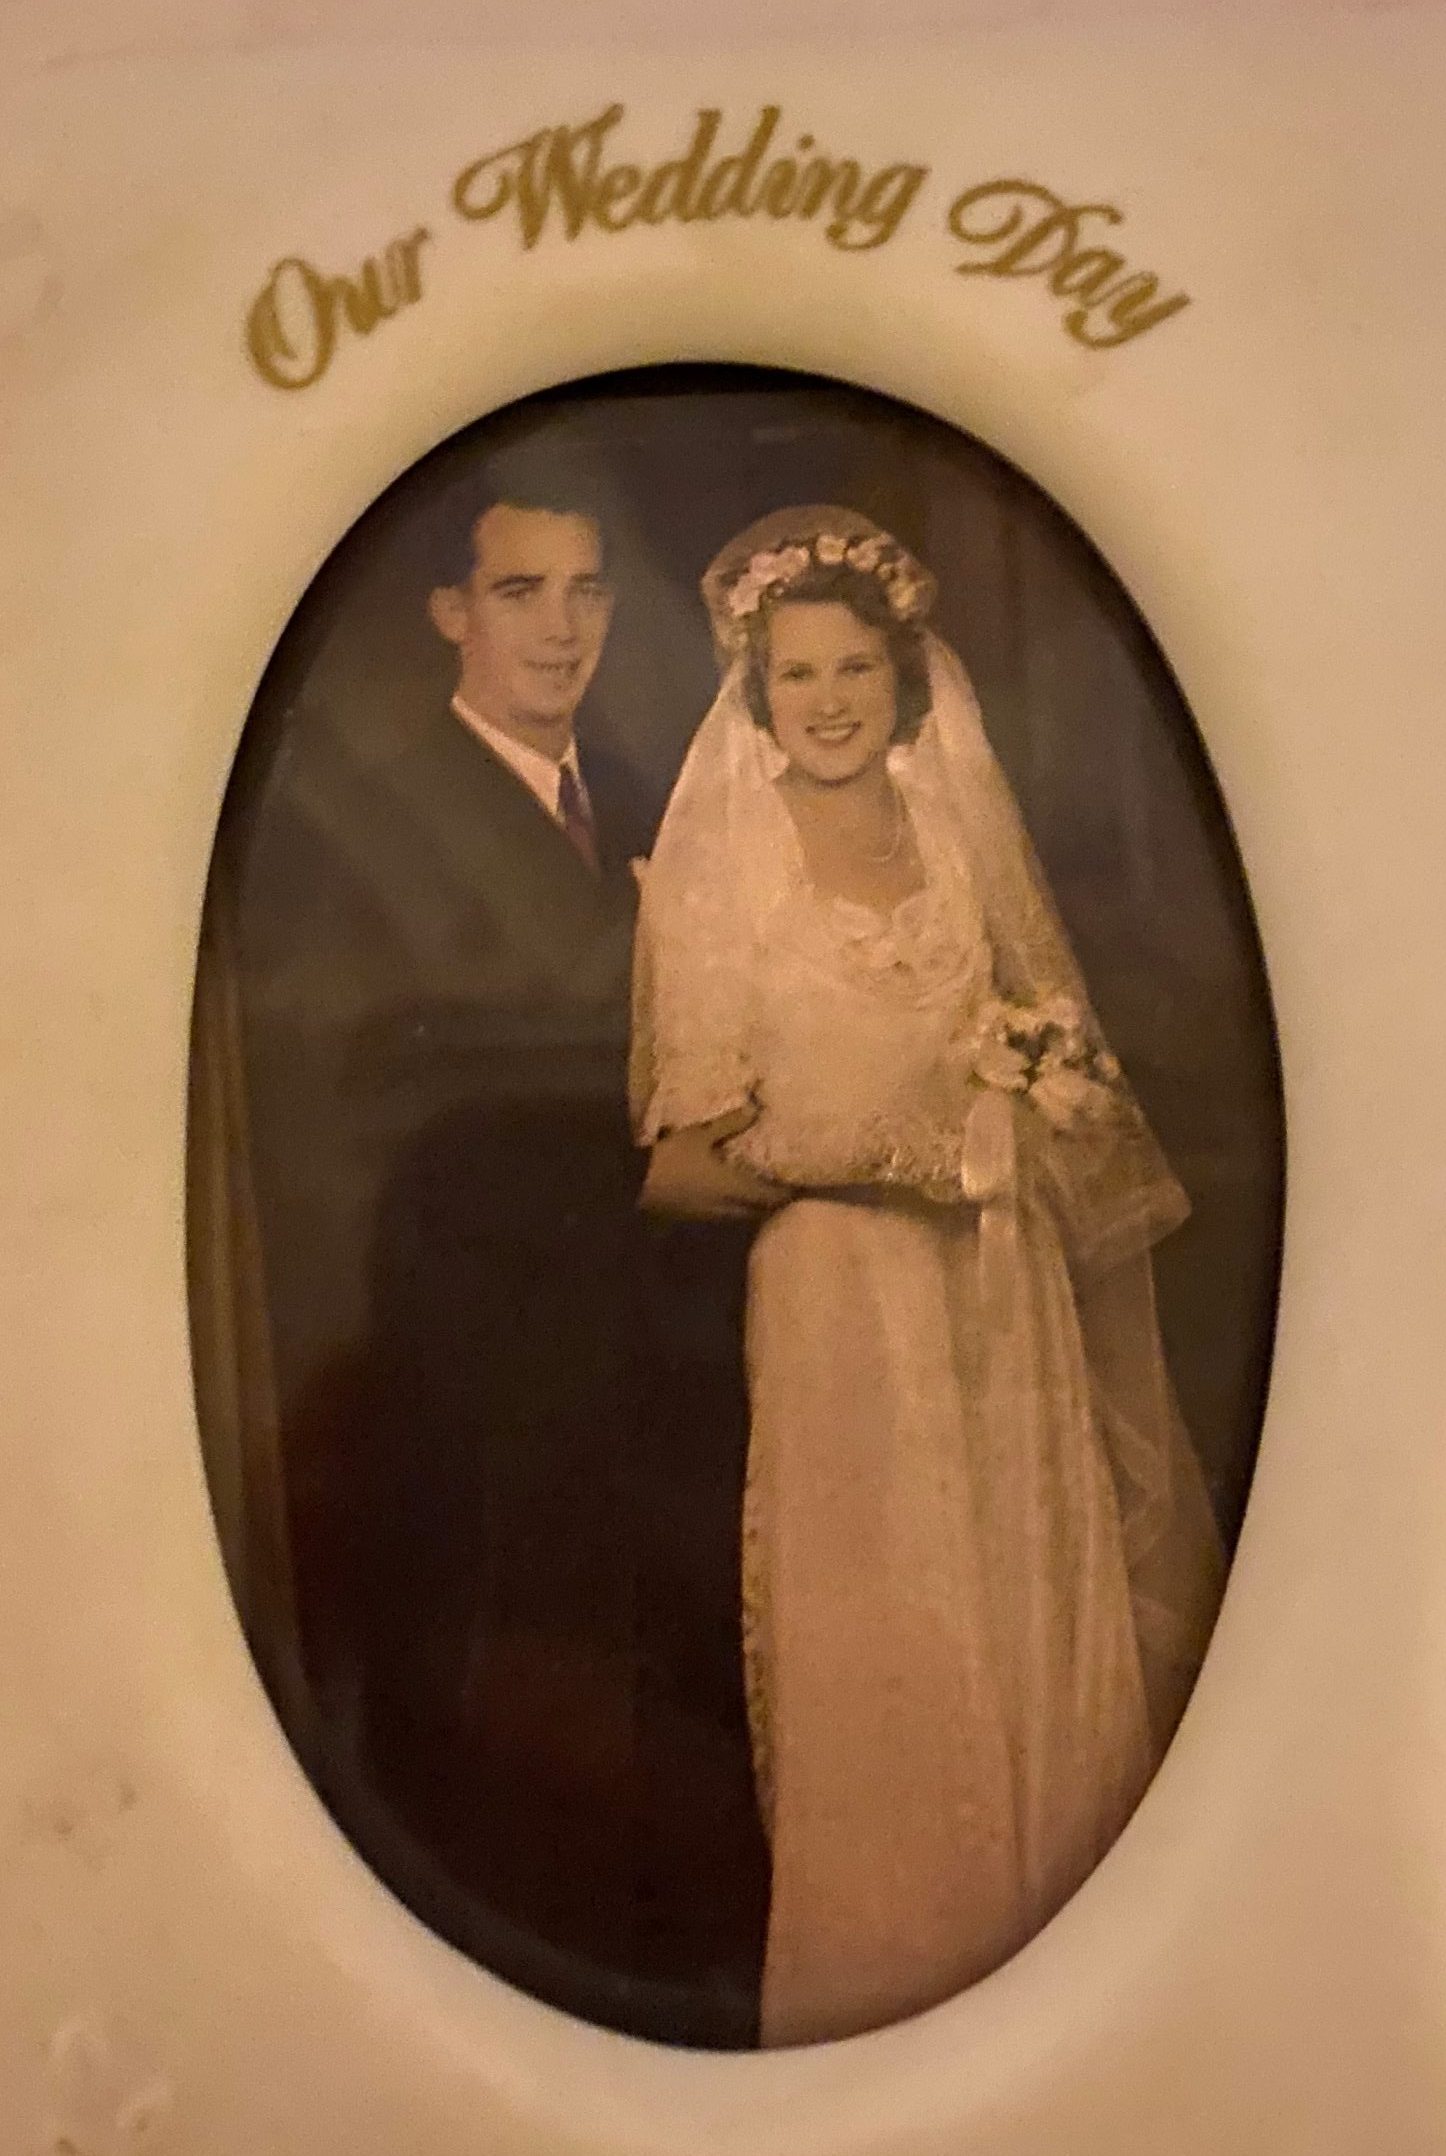 A photo John Collett keeps of him and his late wife Fay on their wedding day in 1949.